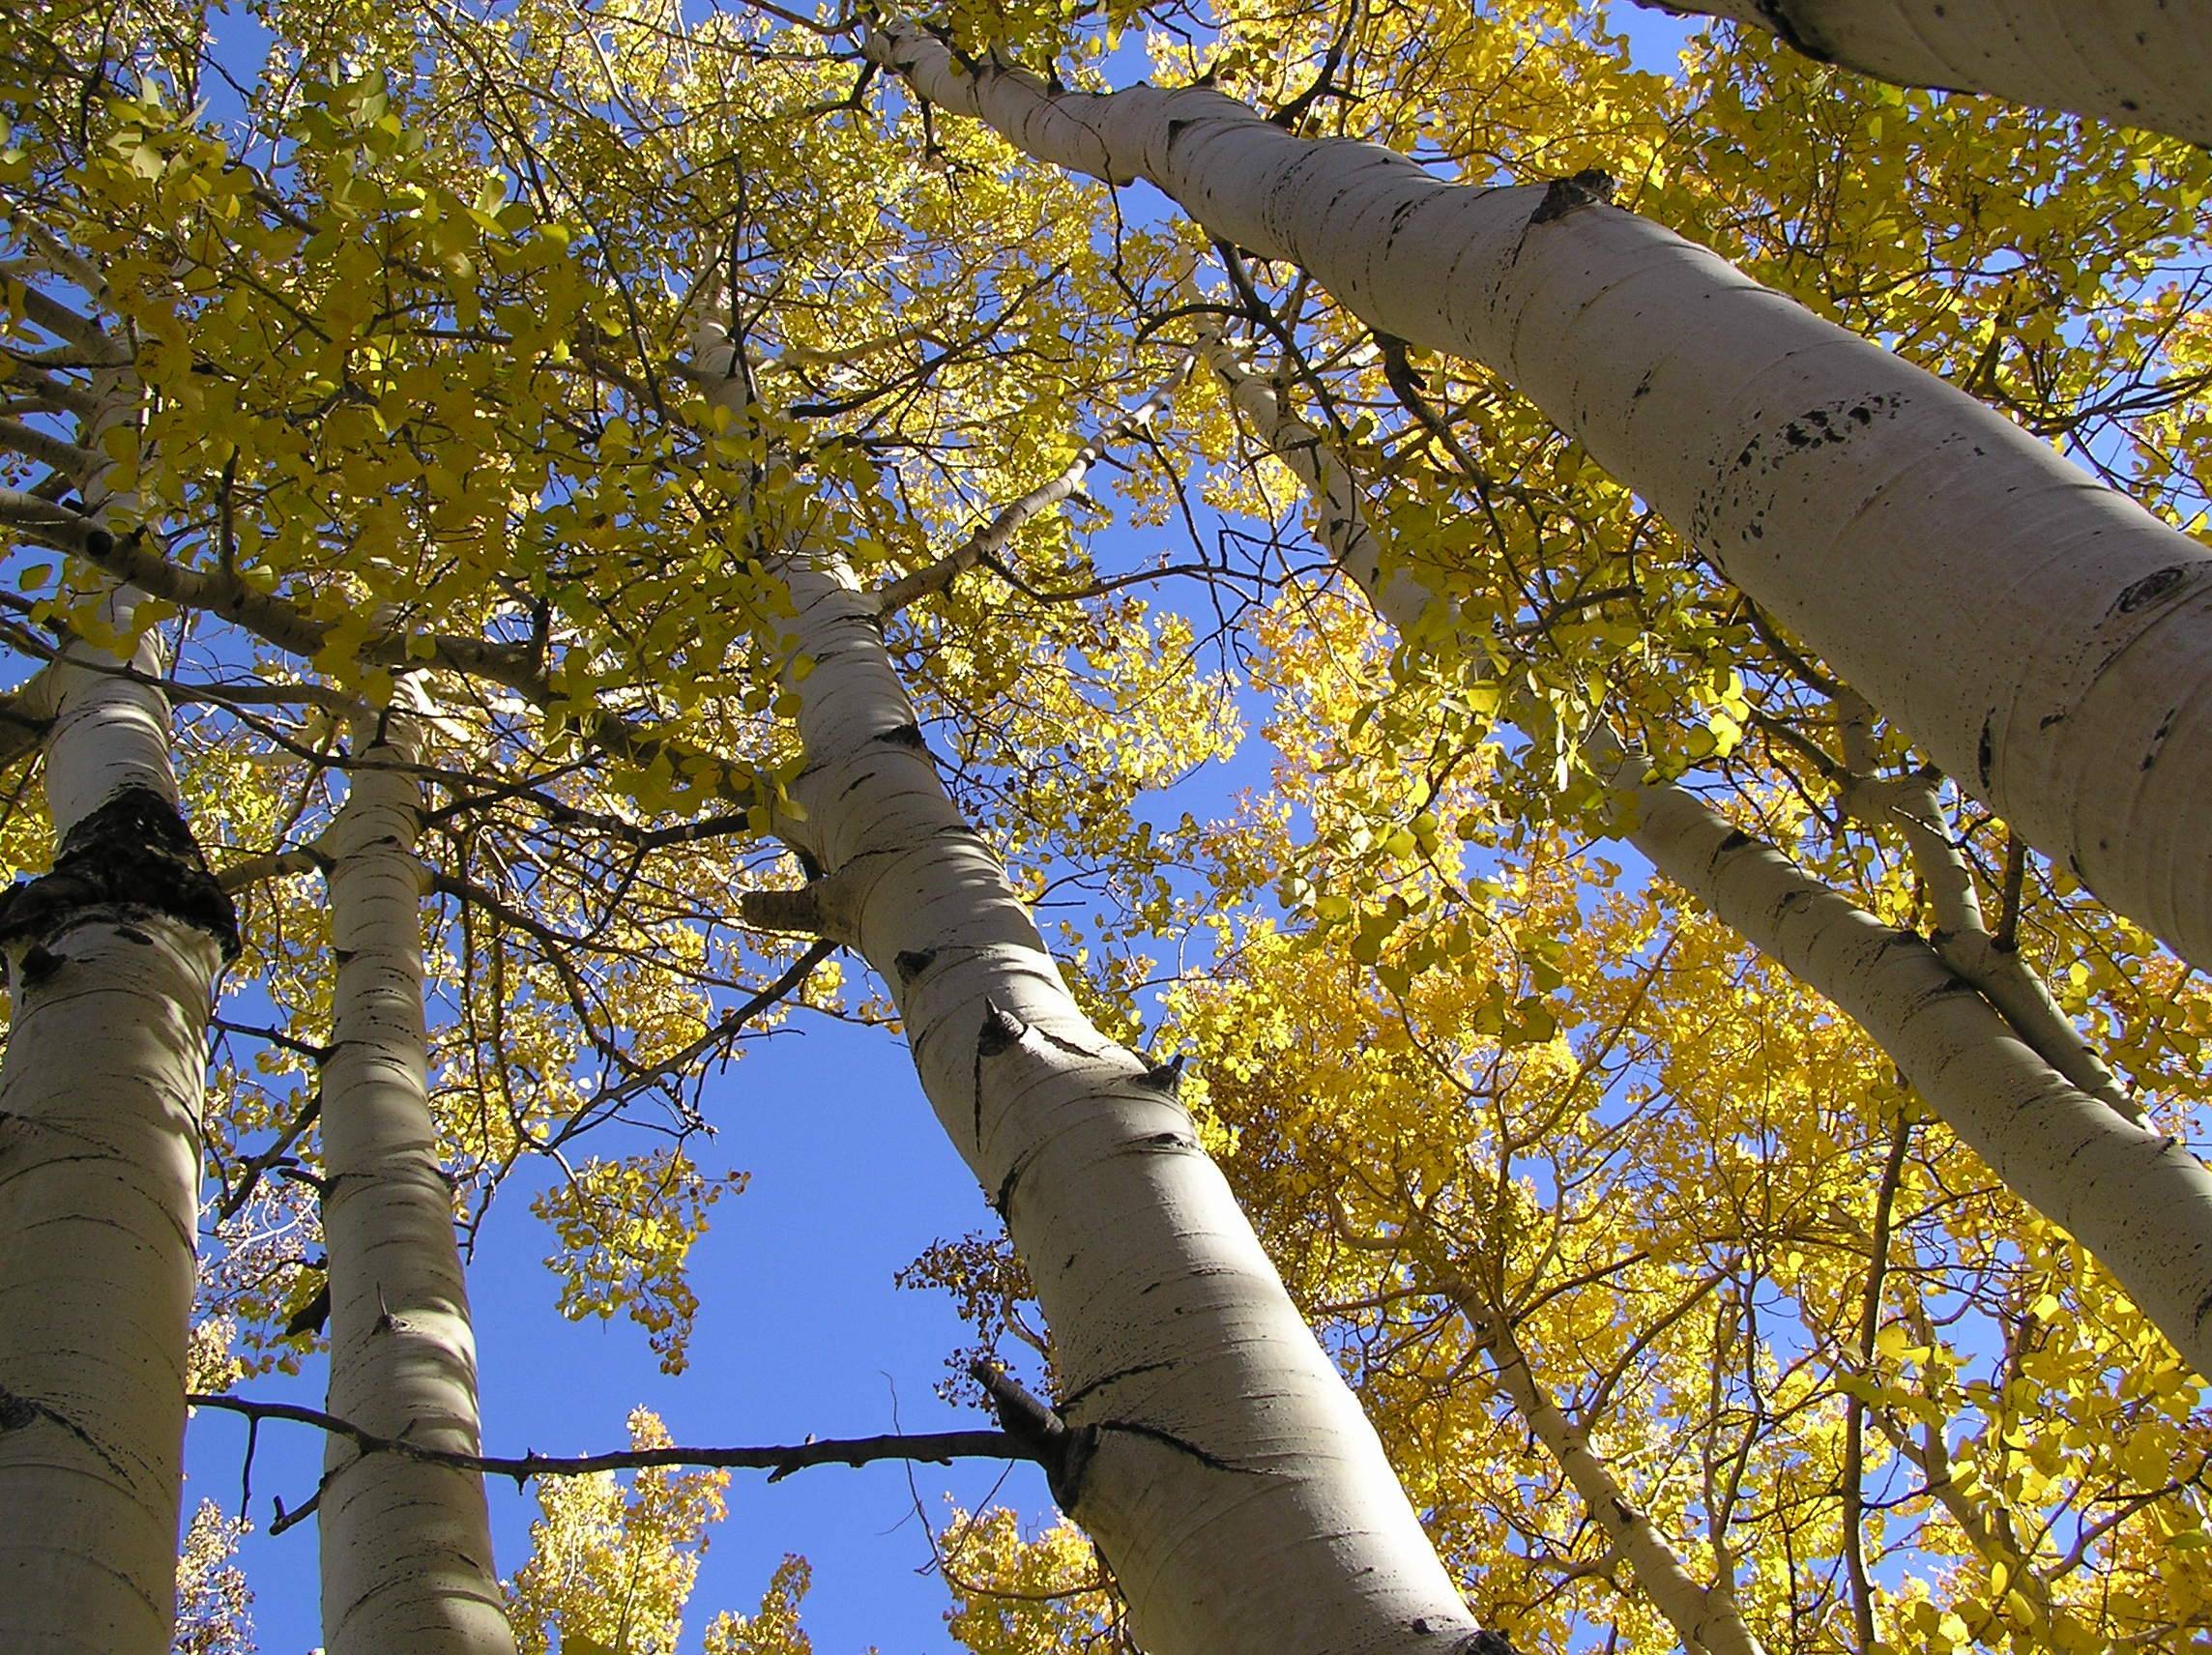 yellow leaves with brown branches and gray-white trunks